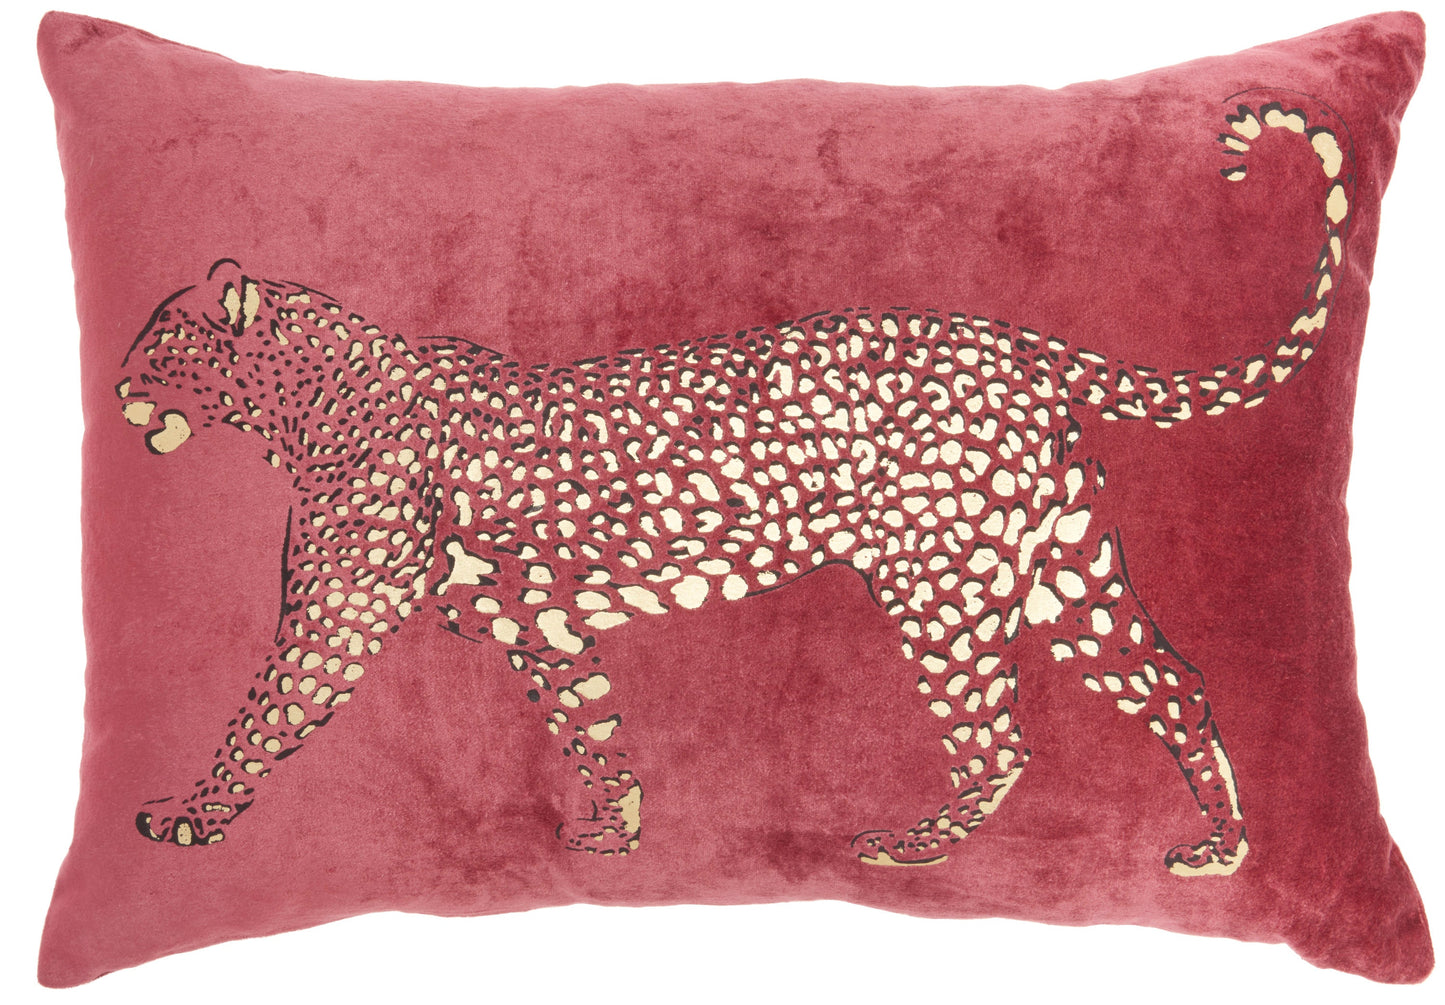 Sofia AC203 Cotton Metallic Leopard Throw Pillow From Mina Victory By Nourison Rugs